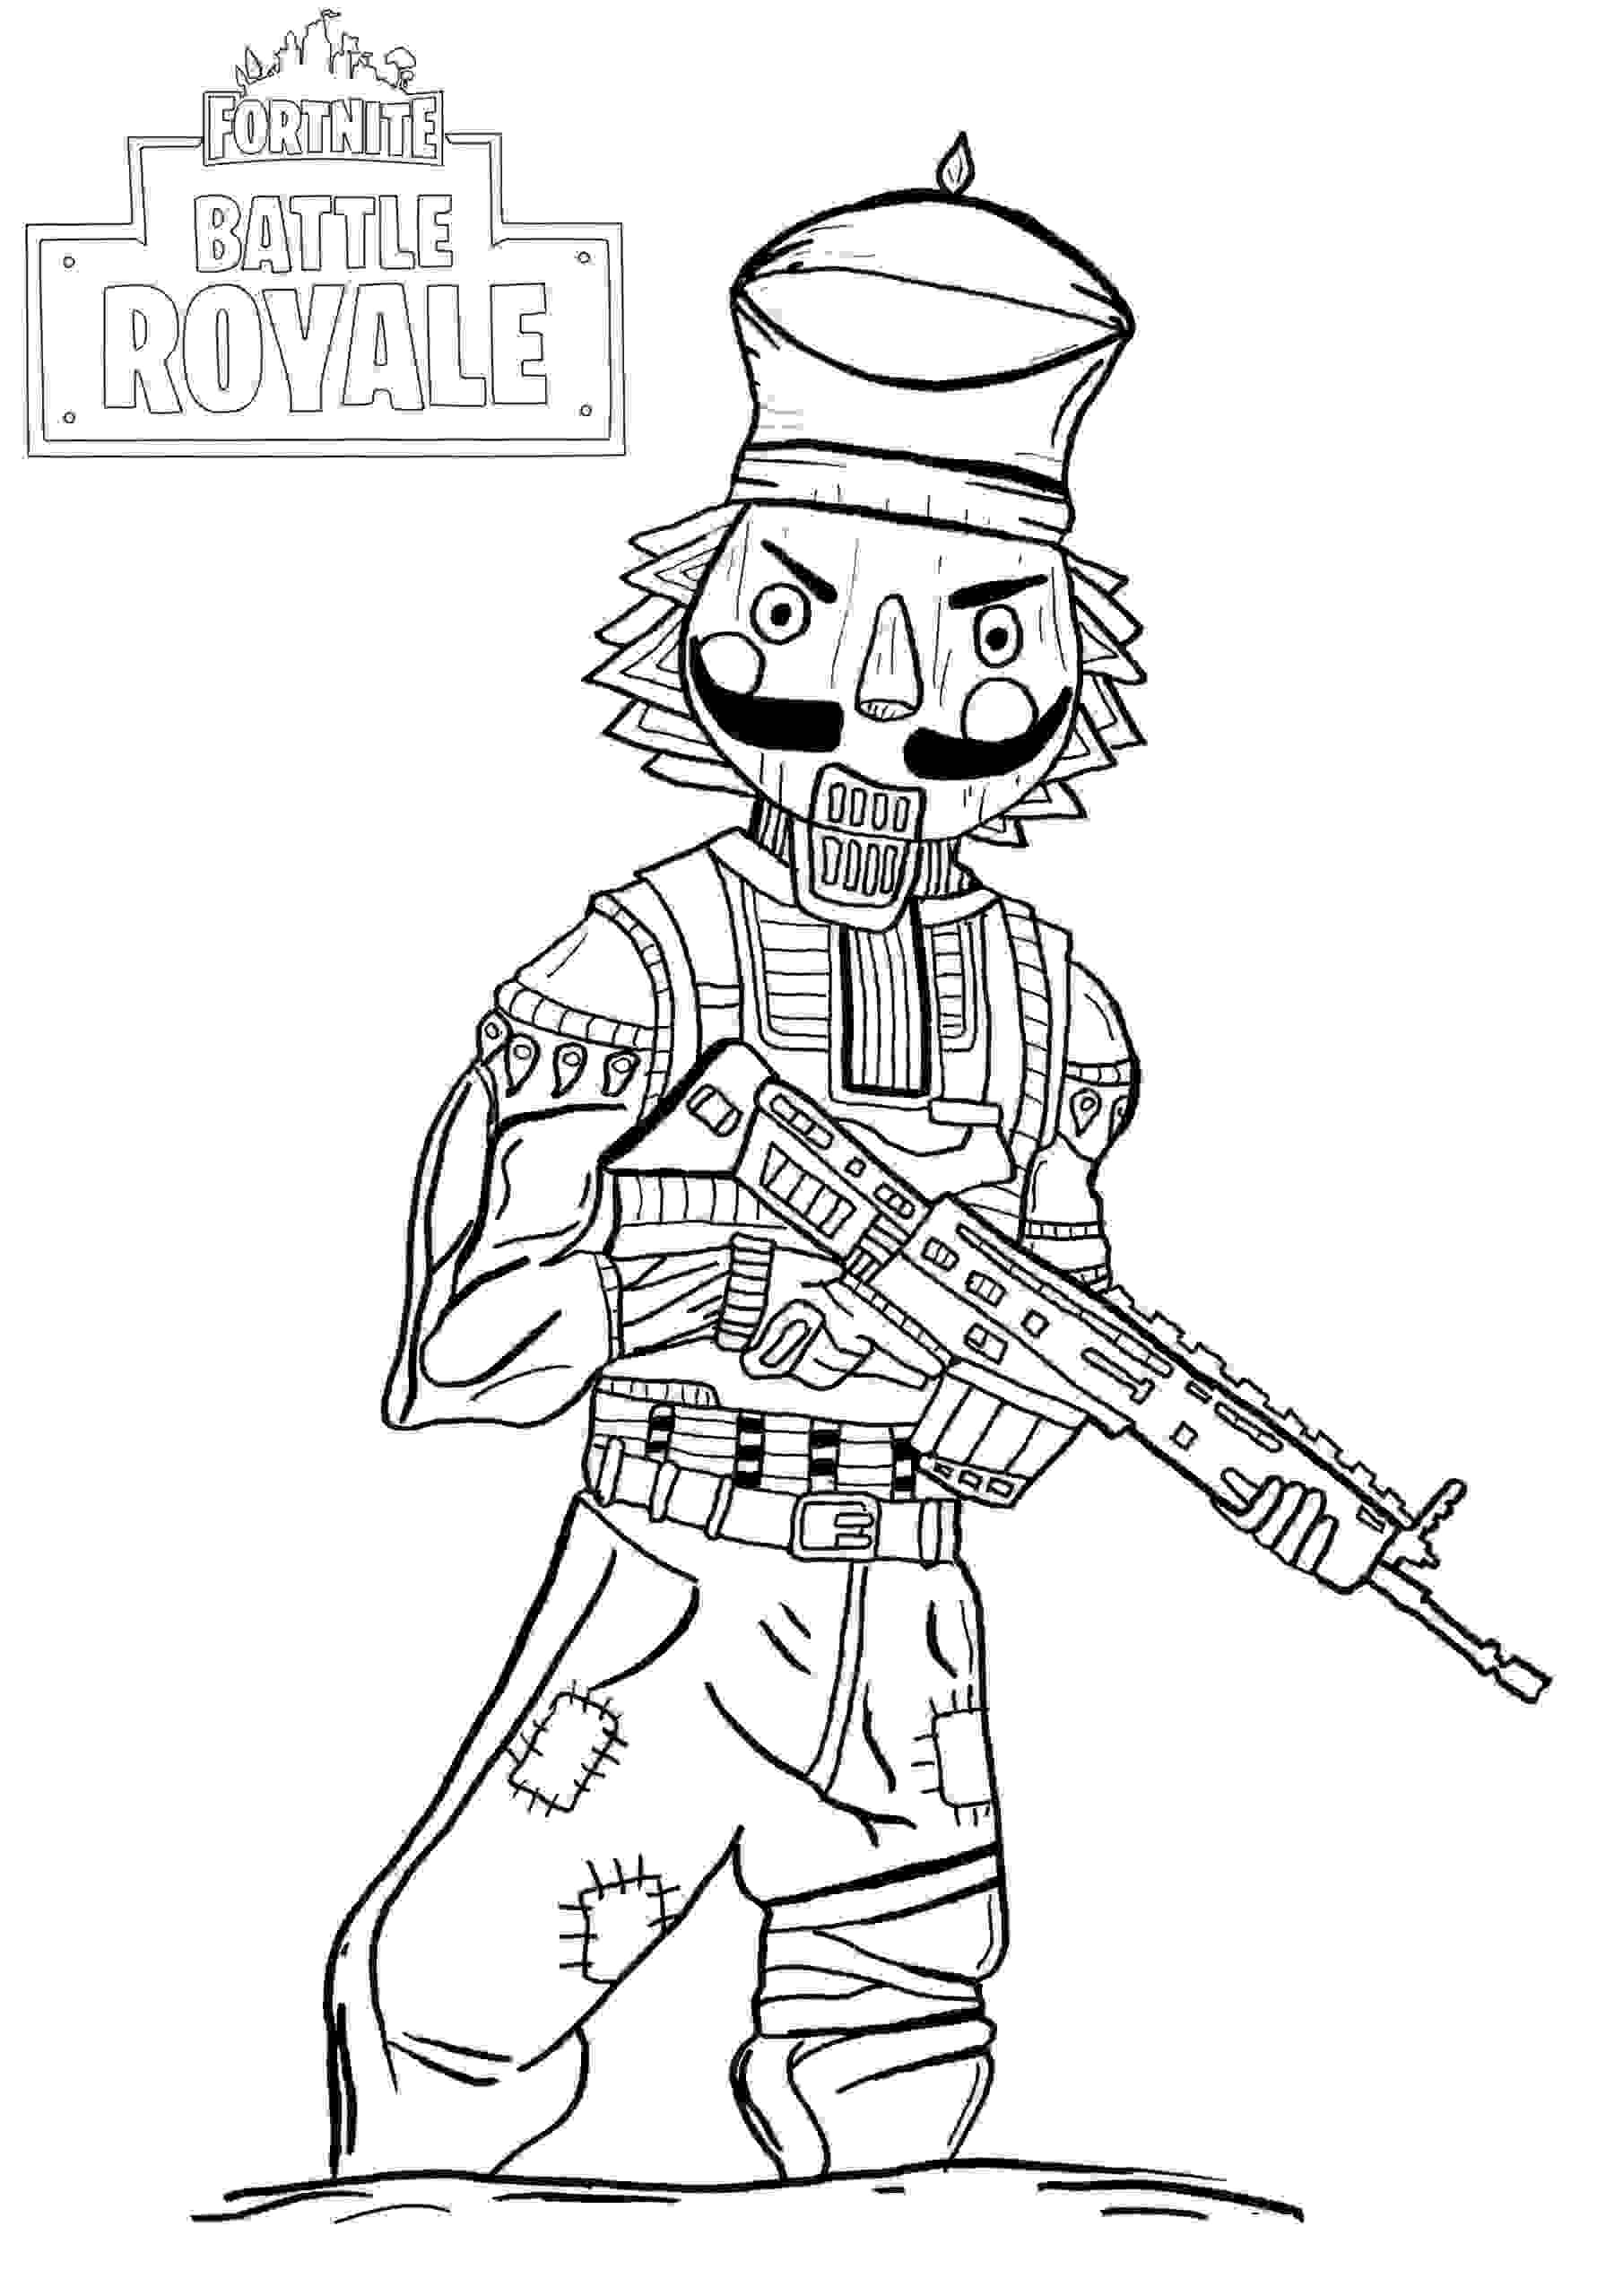 Crackshot carries Scar from Fortnite gaame Coloring Pages